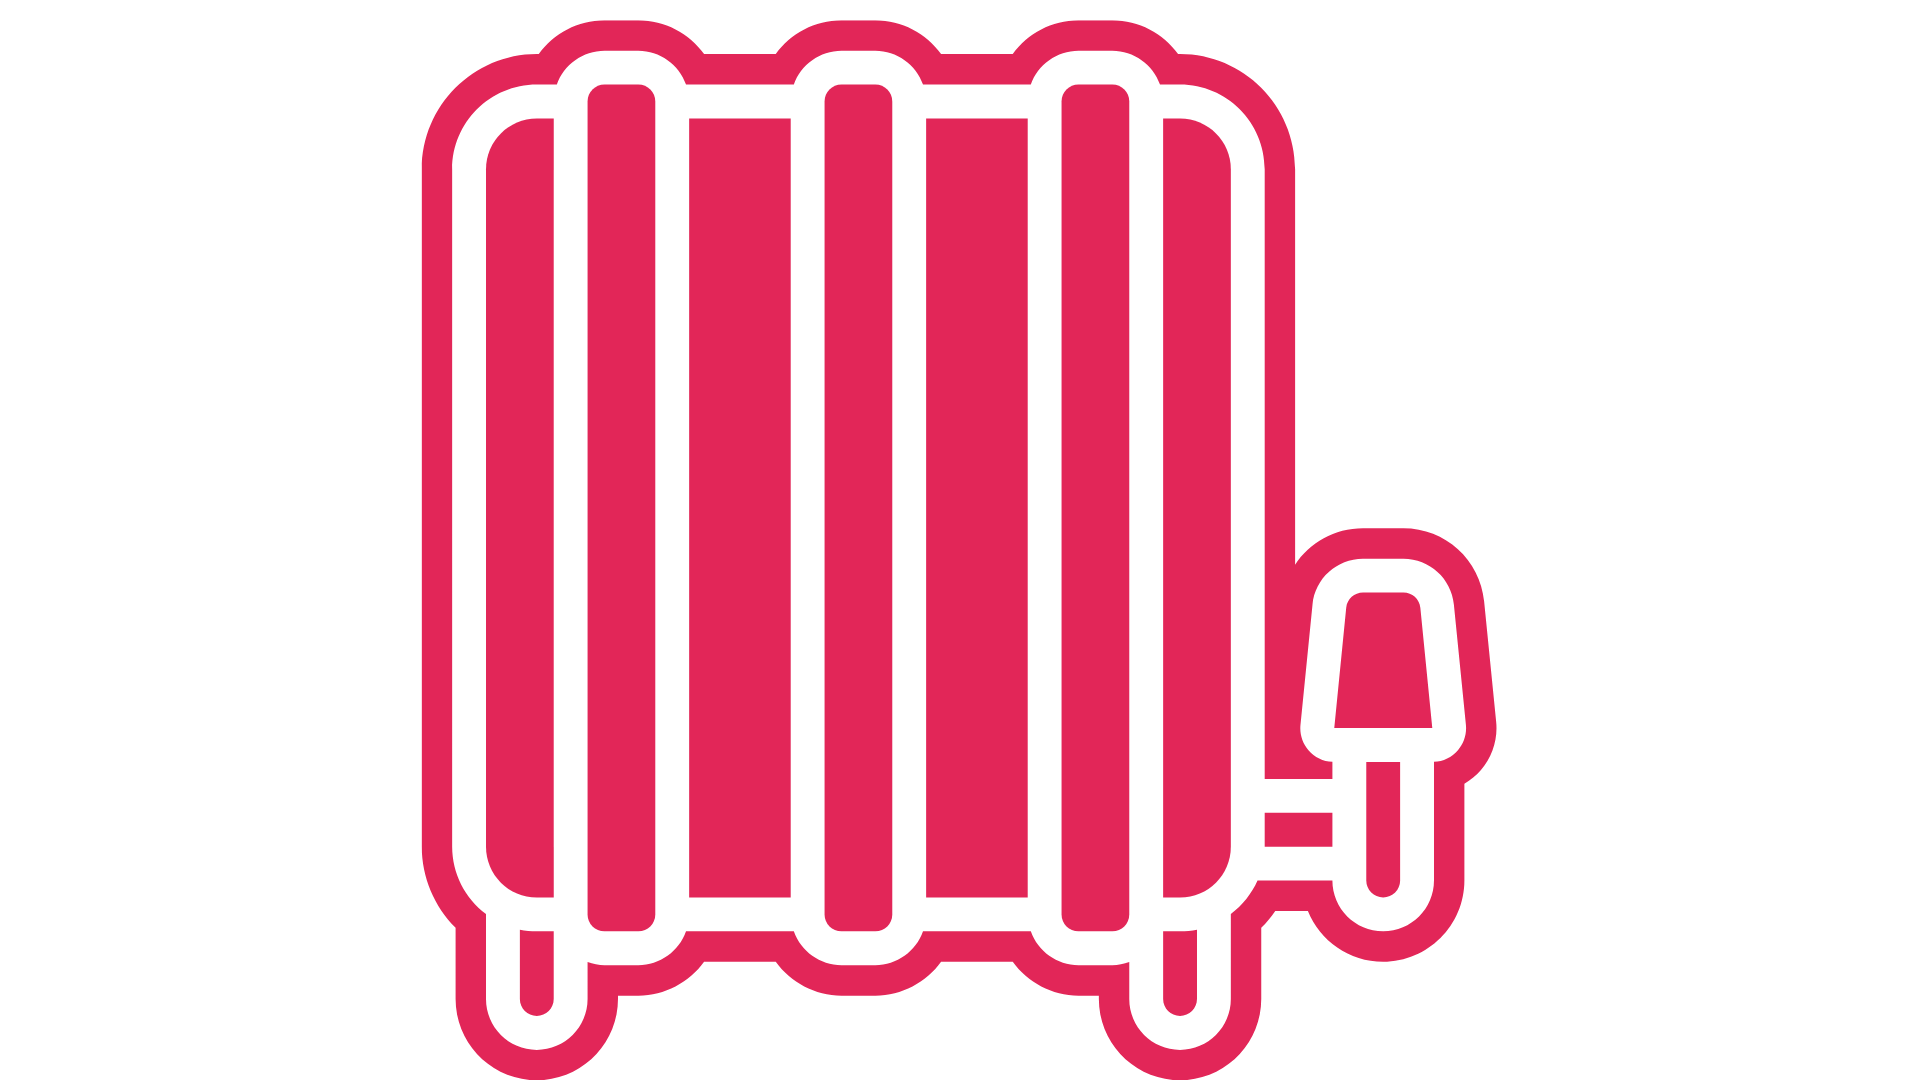 graphic of a radiator